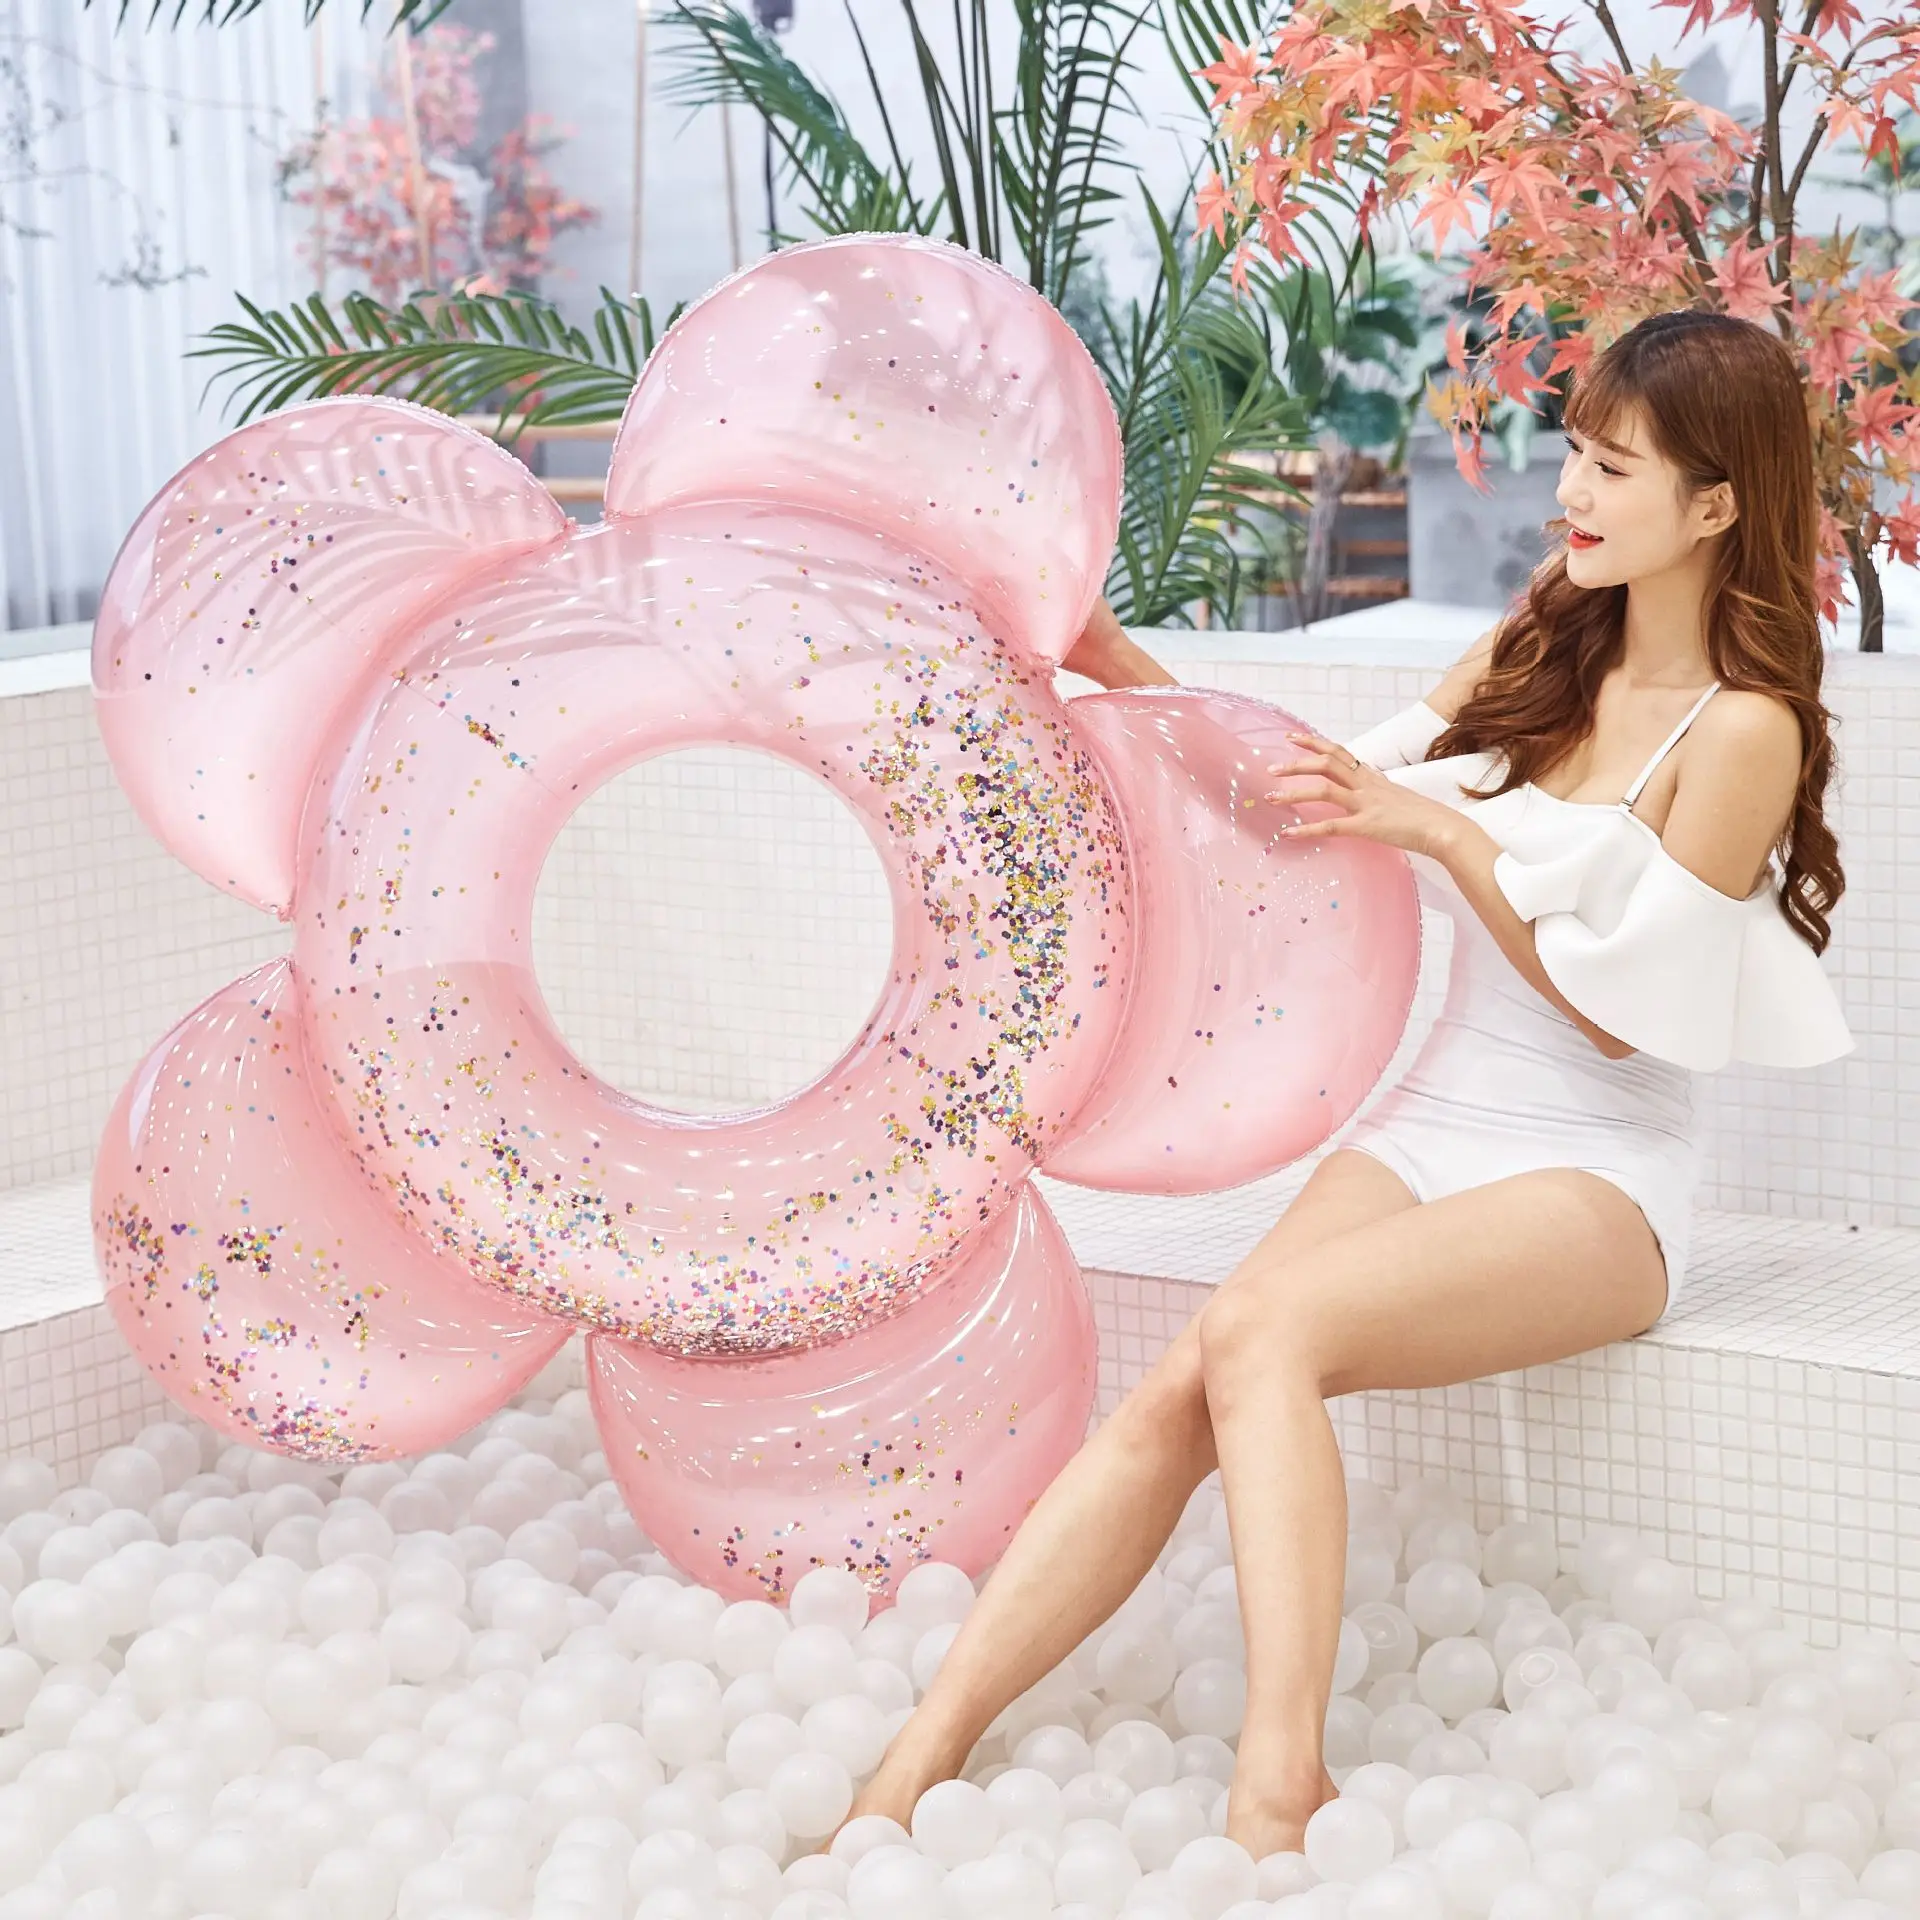 New Pink Flower Inflatable Pool Float Swimming Ring Rubber Ring Pool Party Toys Water Mattress Beach Bed For Adults Child